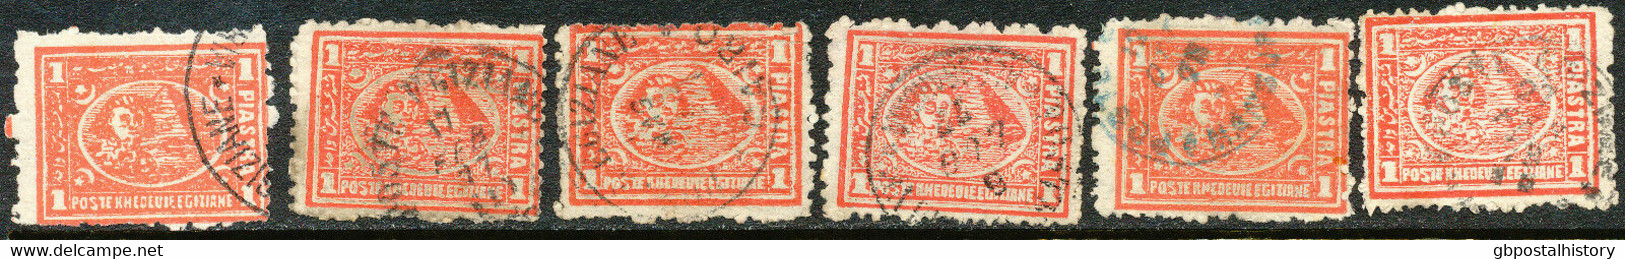 EGYPT 1872 Sphinx Before Cheopspyramide 1 Pia From Pink (3) To Brickred (11) VFU - 1866-1914 Khedivate Of Egypt